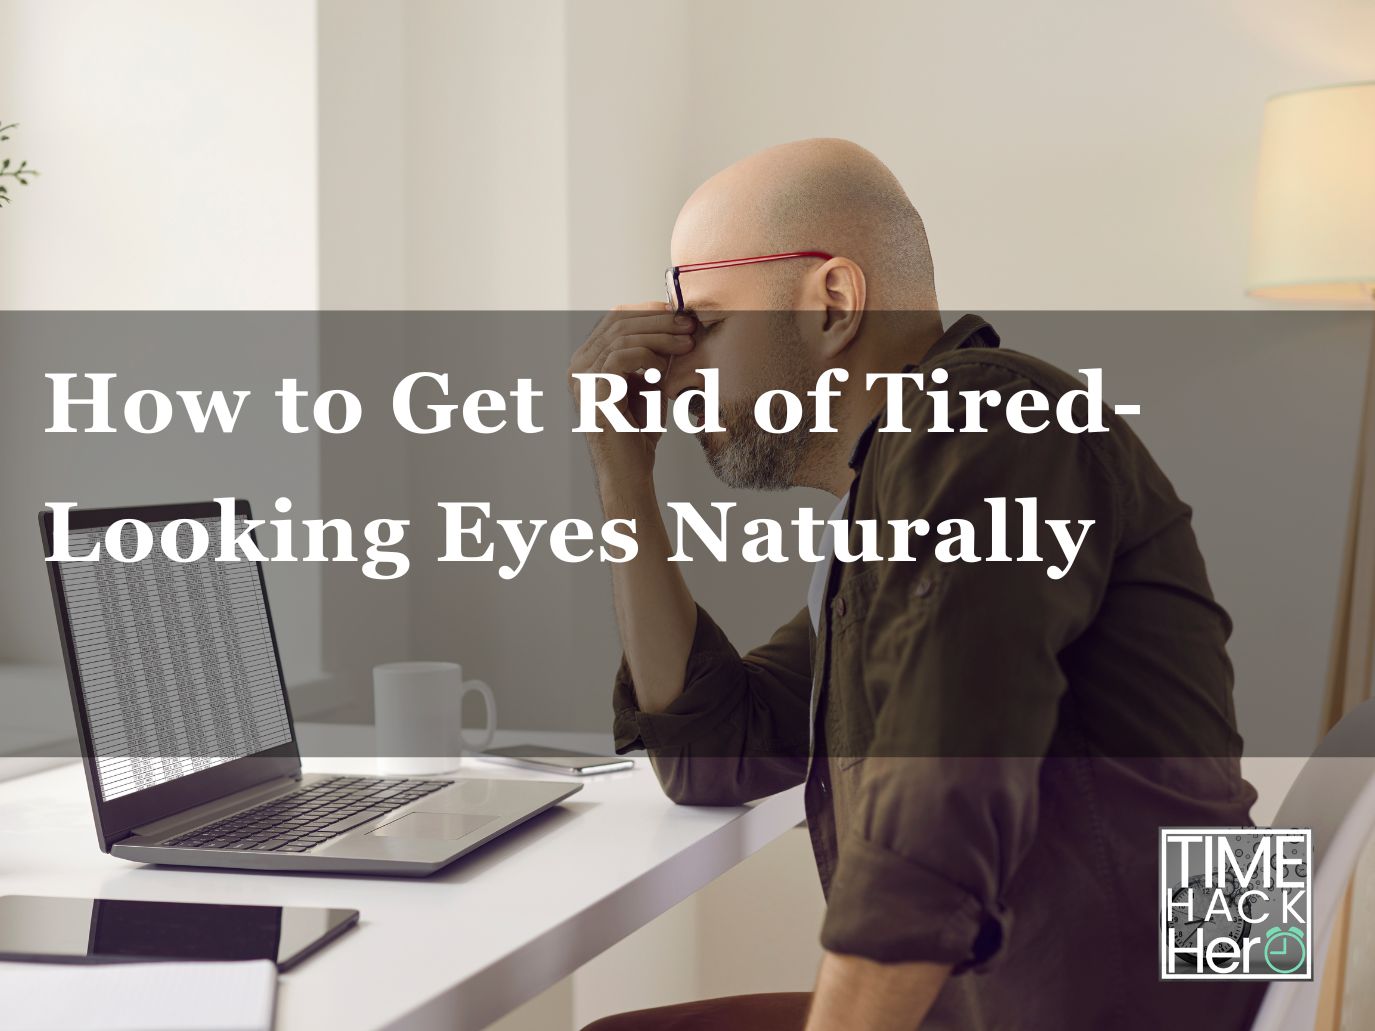 How to Get Rid of Tired-Looking Eyes Naturally